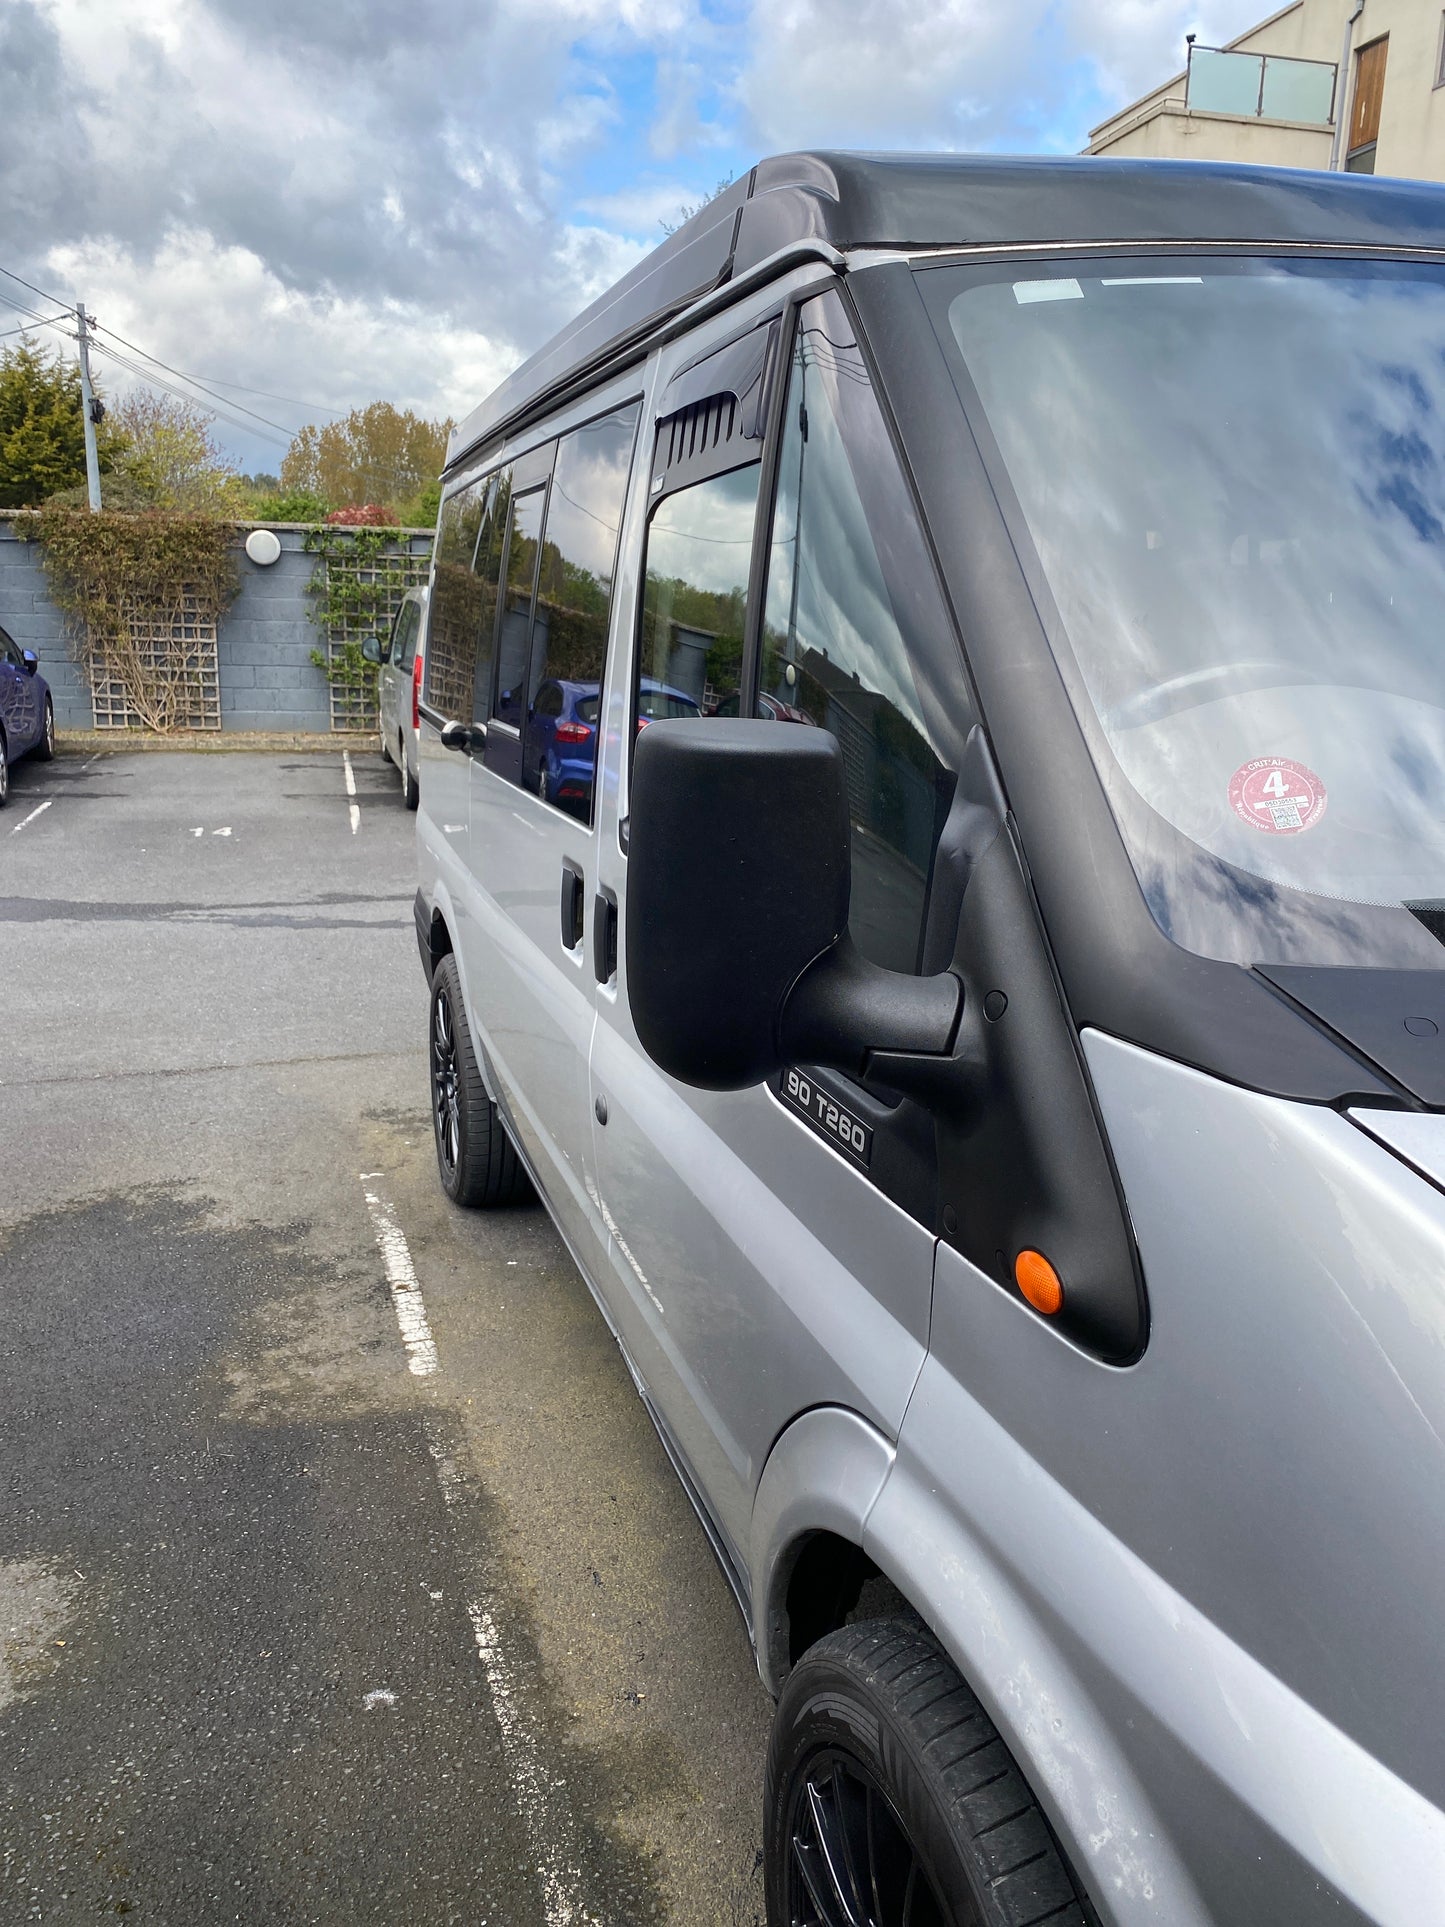 FORD TRANSIT 2000 TO 2006 MK6 WINDOW BUG VENTS